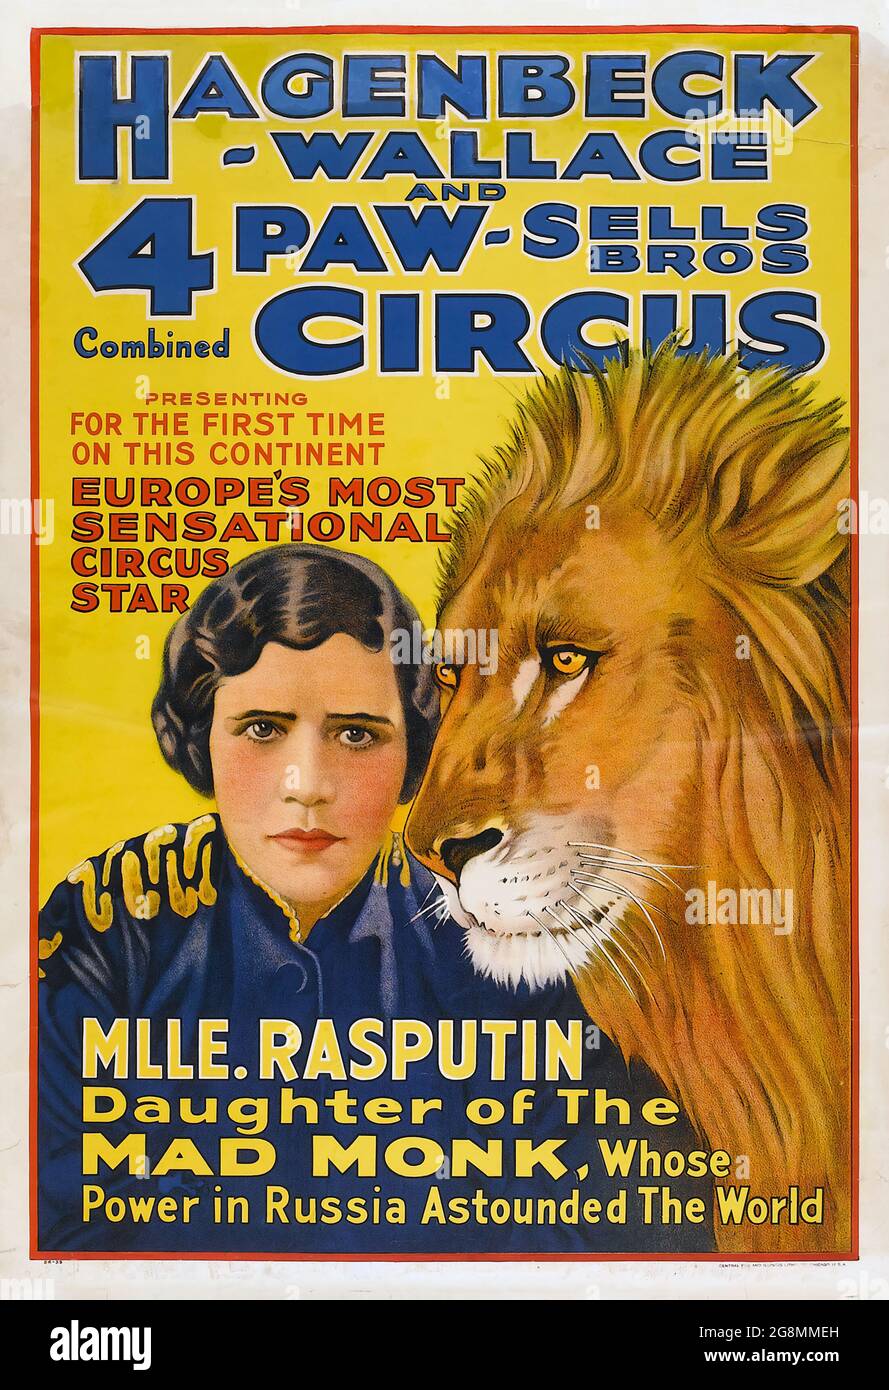 Hagenbeck-Wallace and 4 paw-Sells Bros combined Circus. Feat. Mlle. Rasputin and a lion. Stock Photo